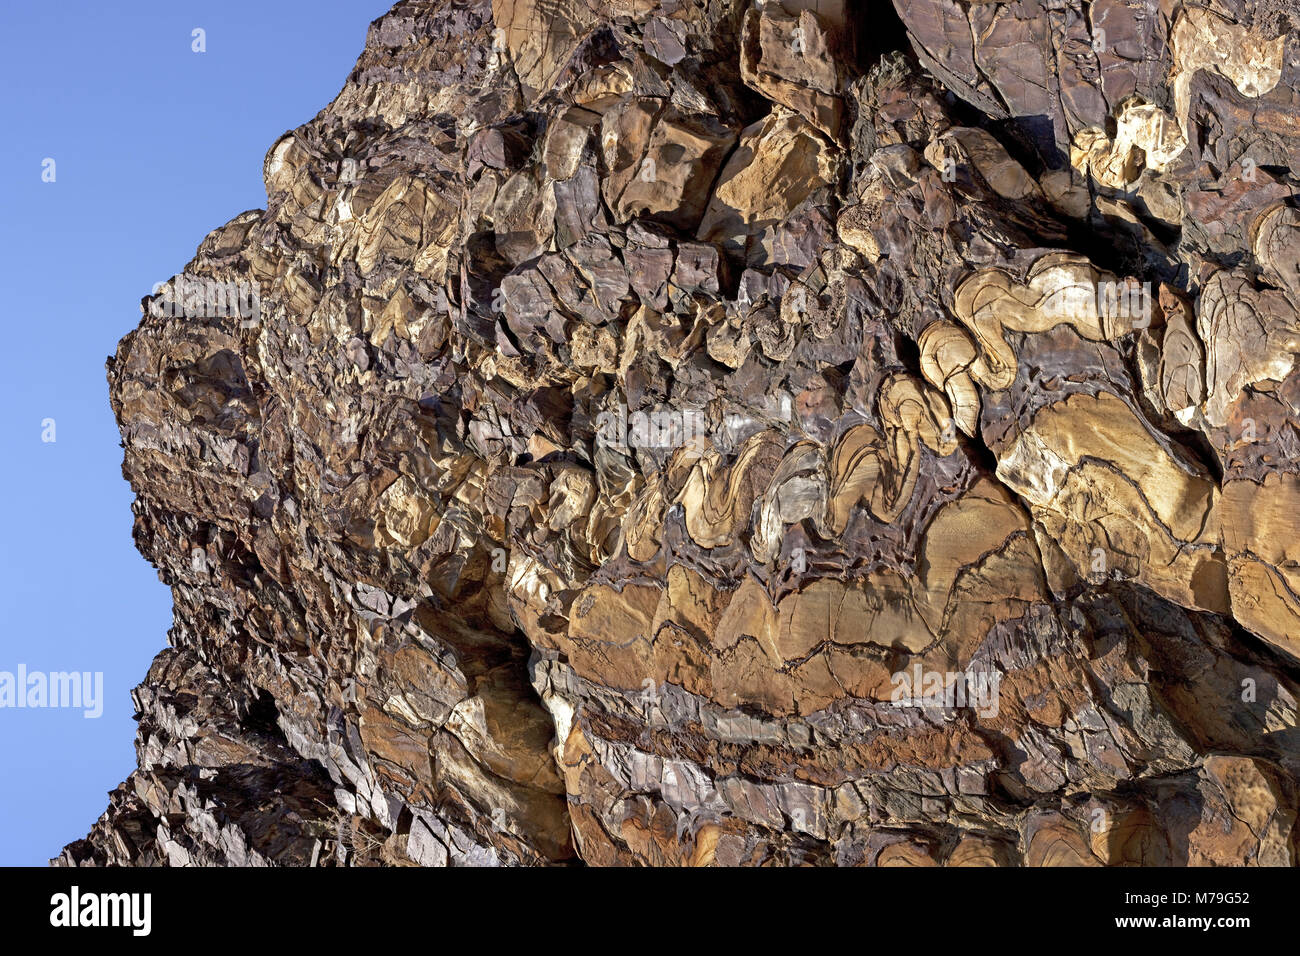 Africa, Namibia, sediment rock, from below, Stock Photo